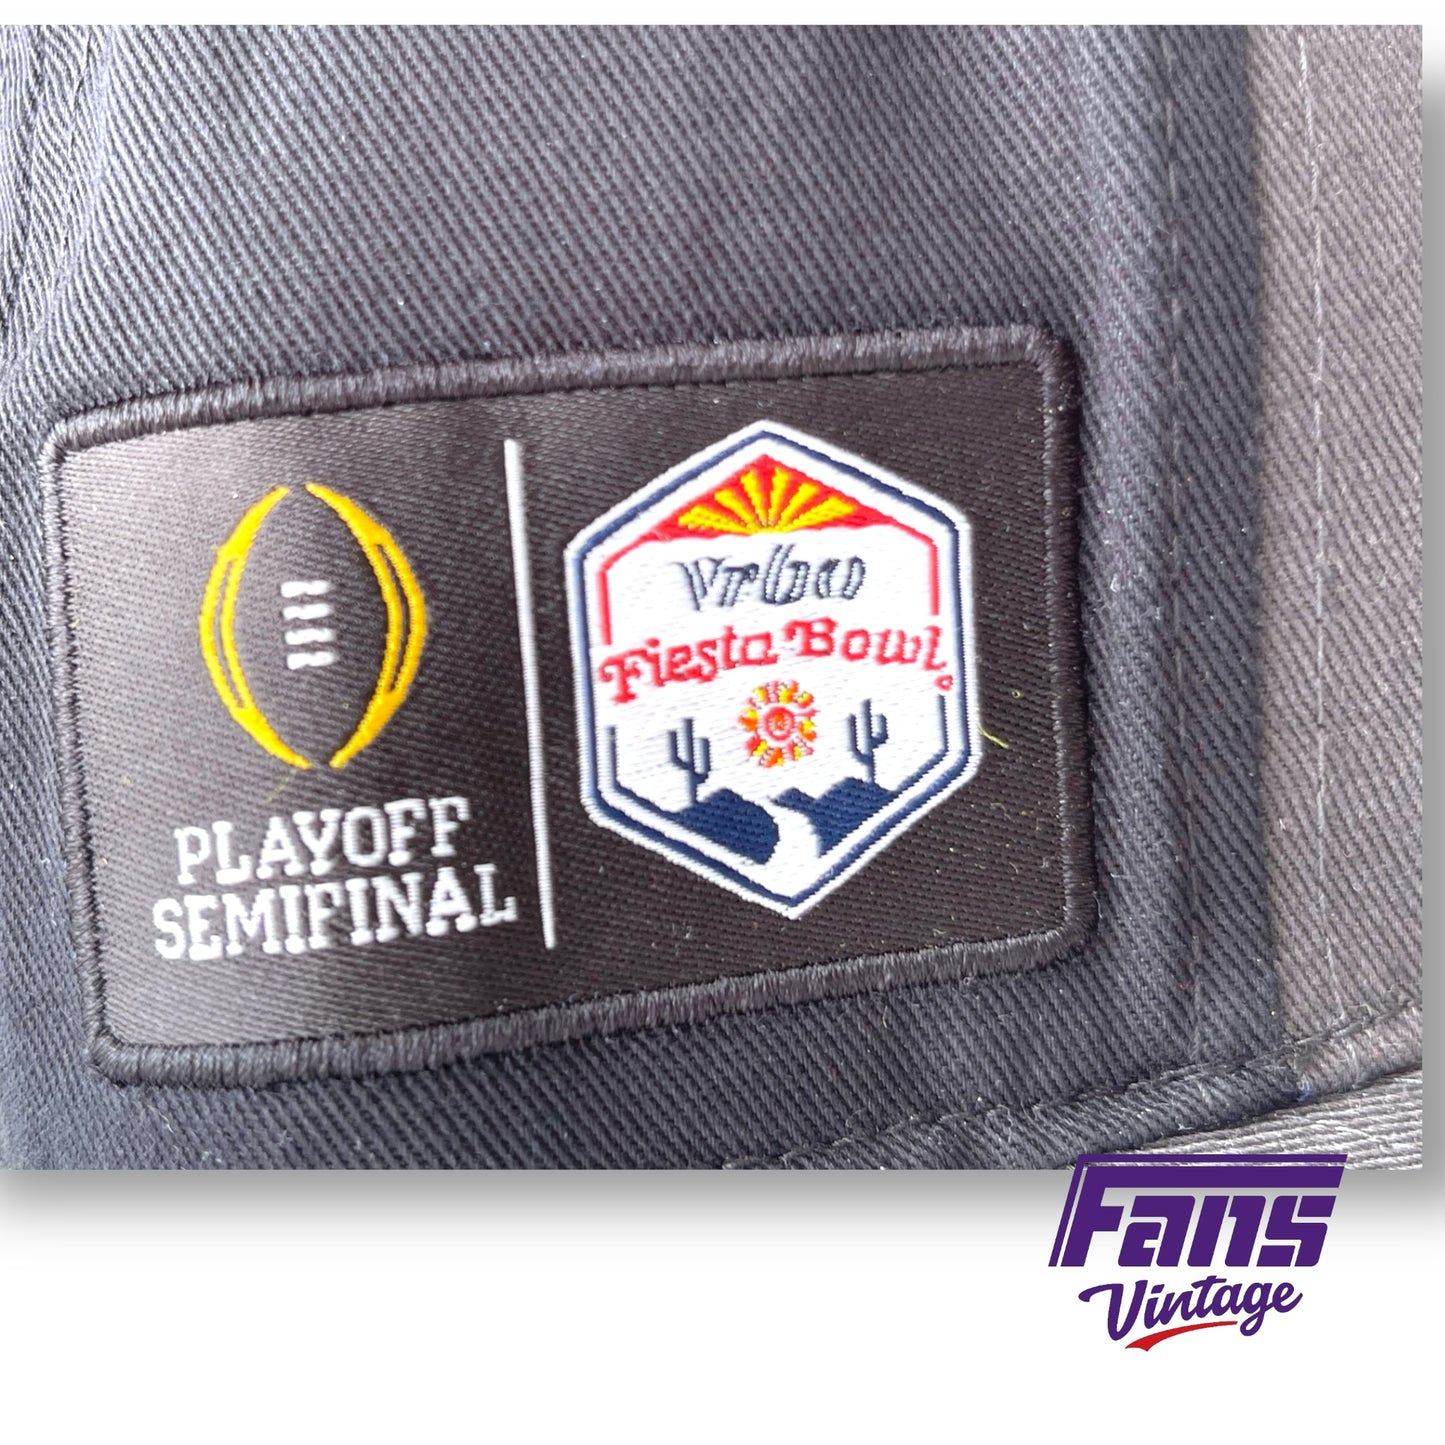 TCU Football Fiesta Bowl Win AUTHENTIC PLAYER ISSUE Nike Post-Game “CHAMPS” Hat